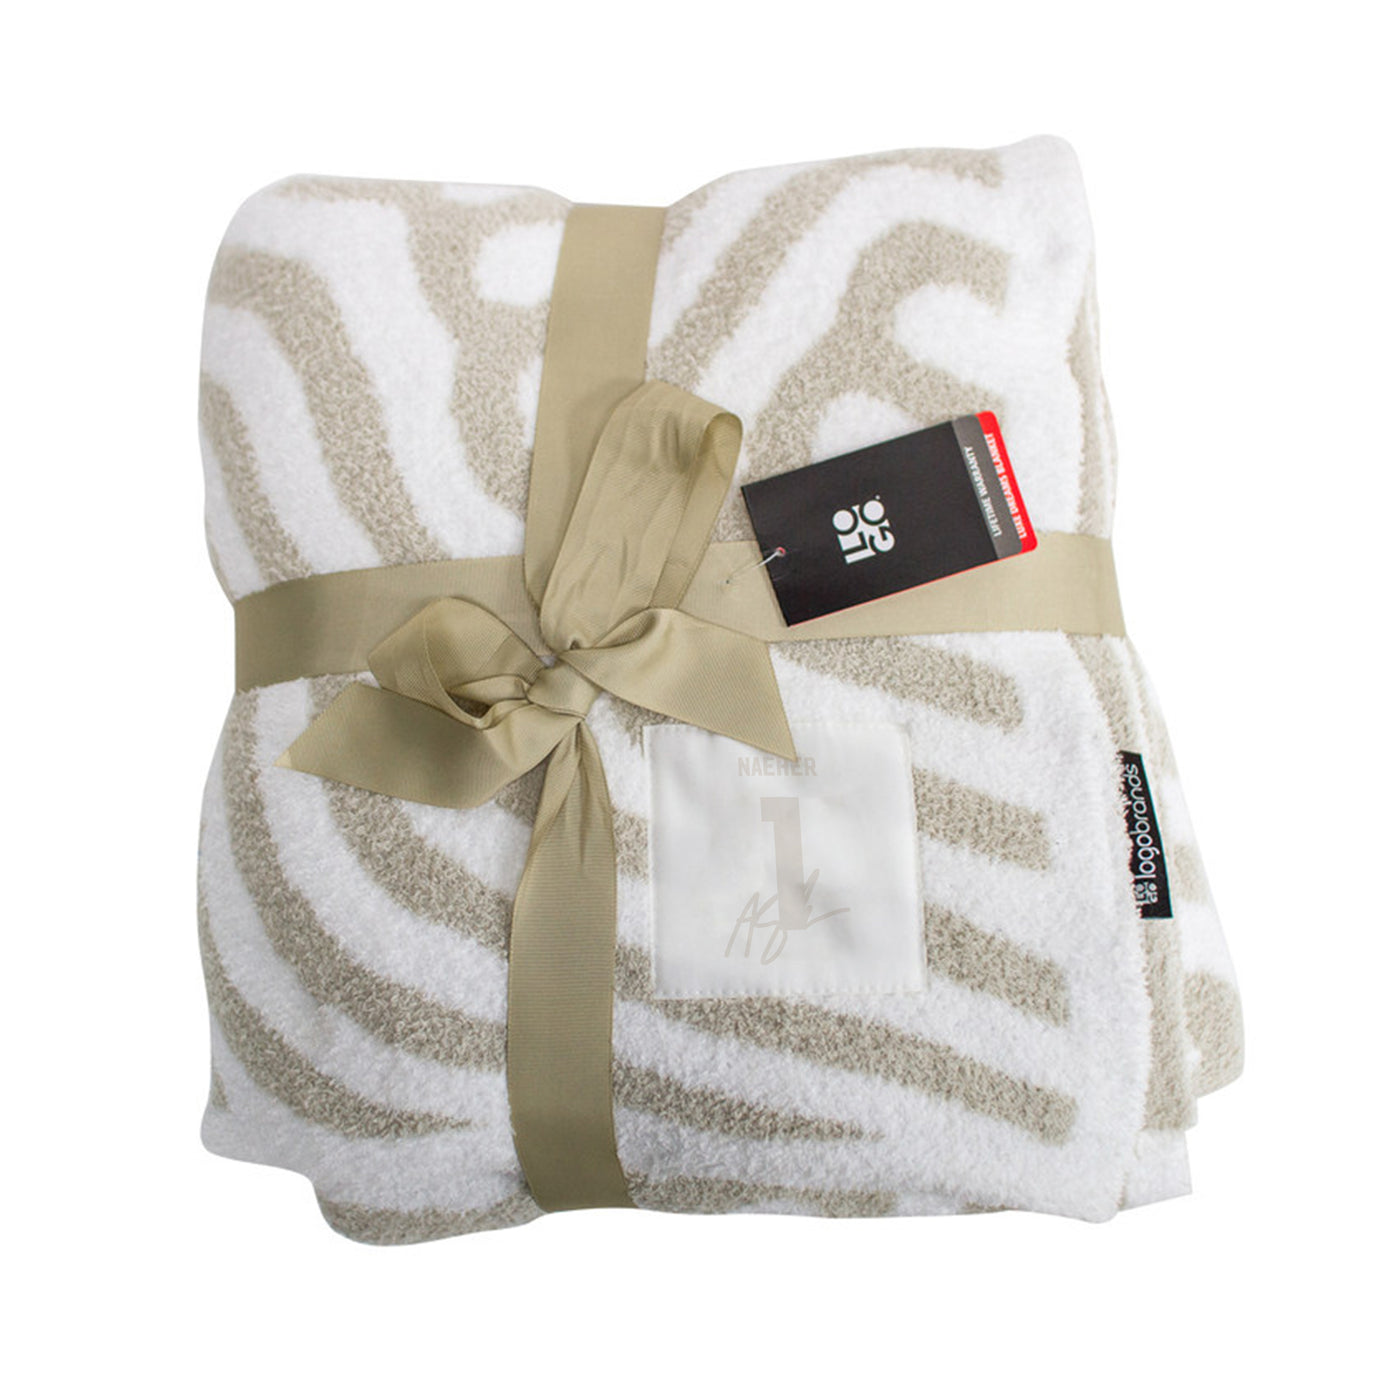 US Womens National Team Alyssa Naeher Luxe Dreams Throw